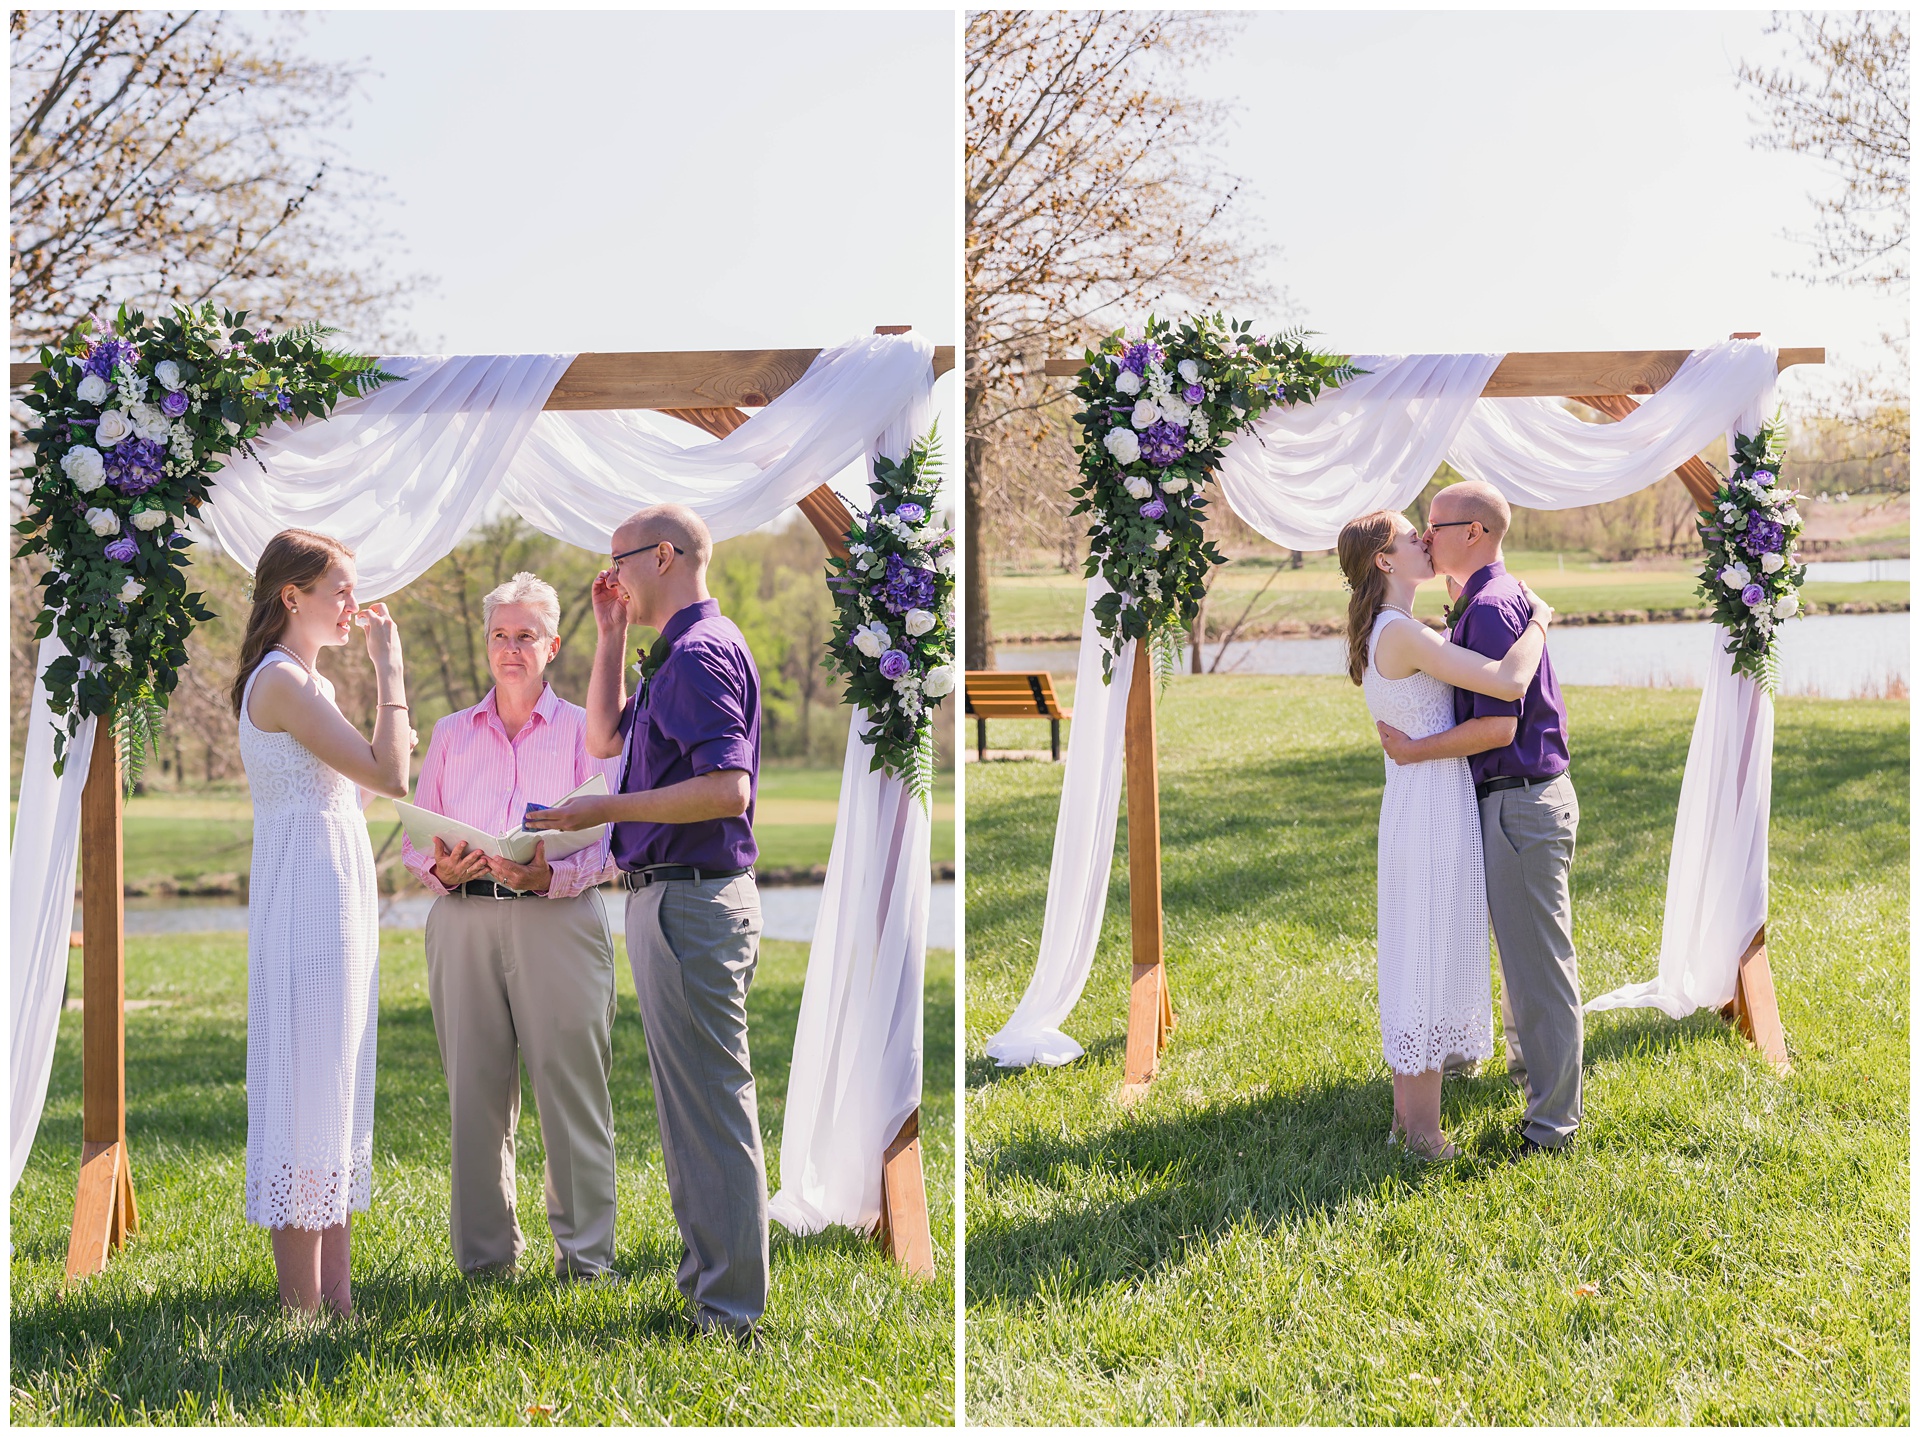 A LOVELY SPRING WEDDING AT HERITAGE PARK WisdomWatson